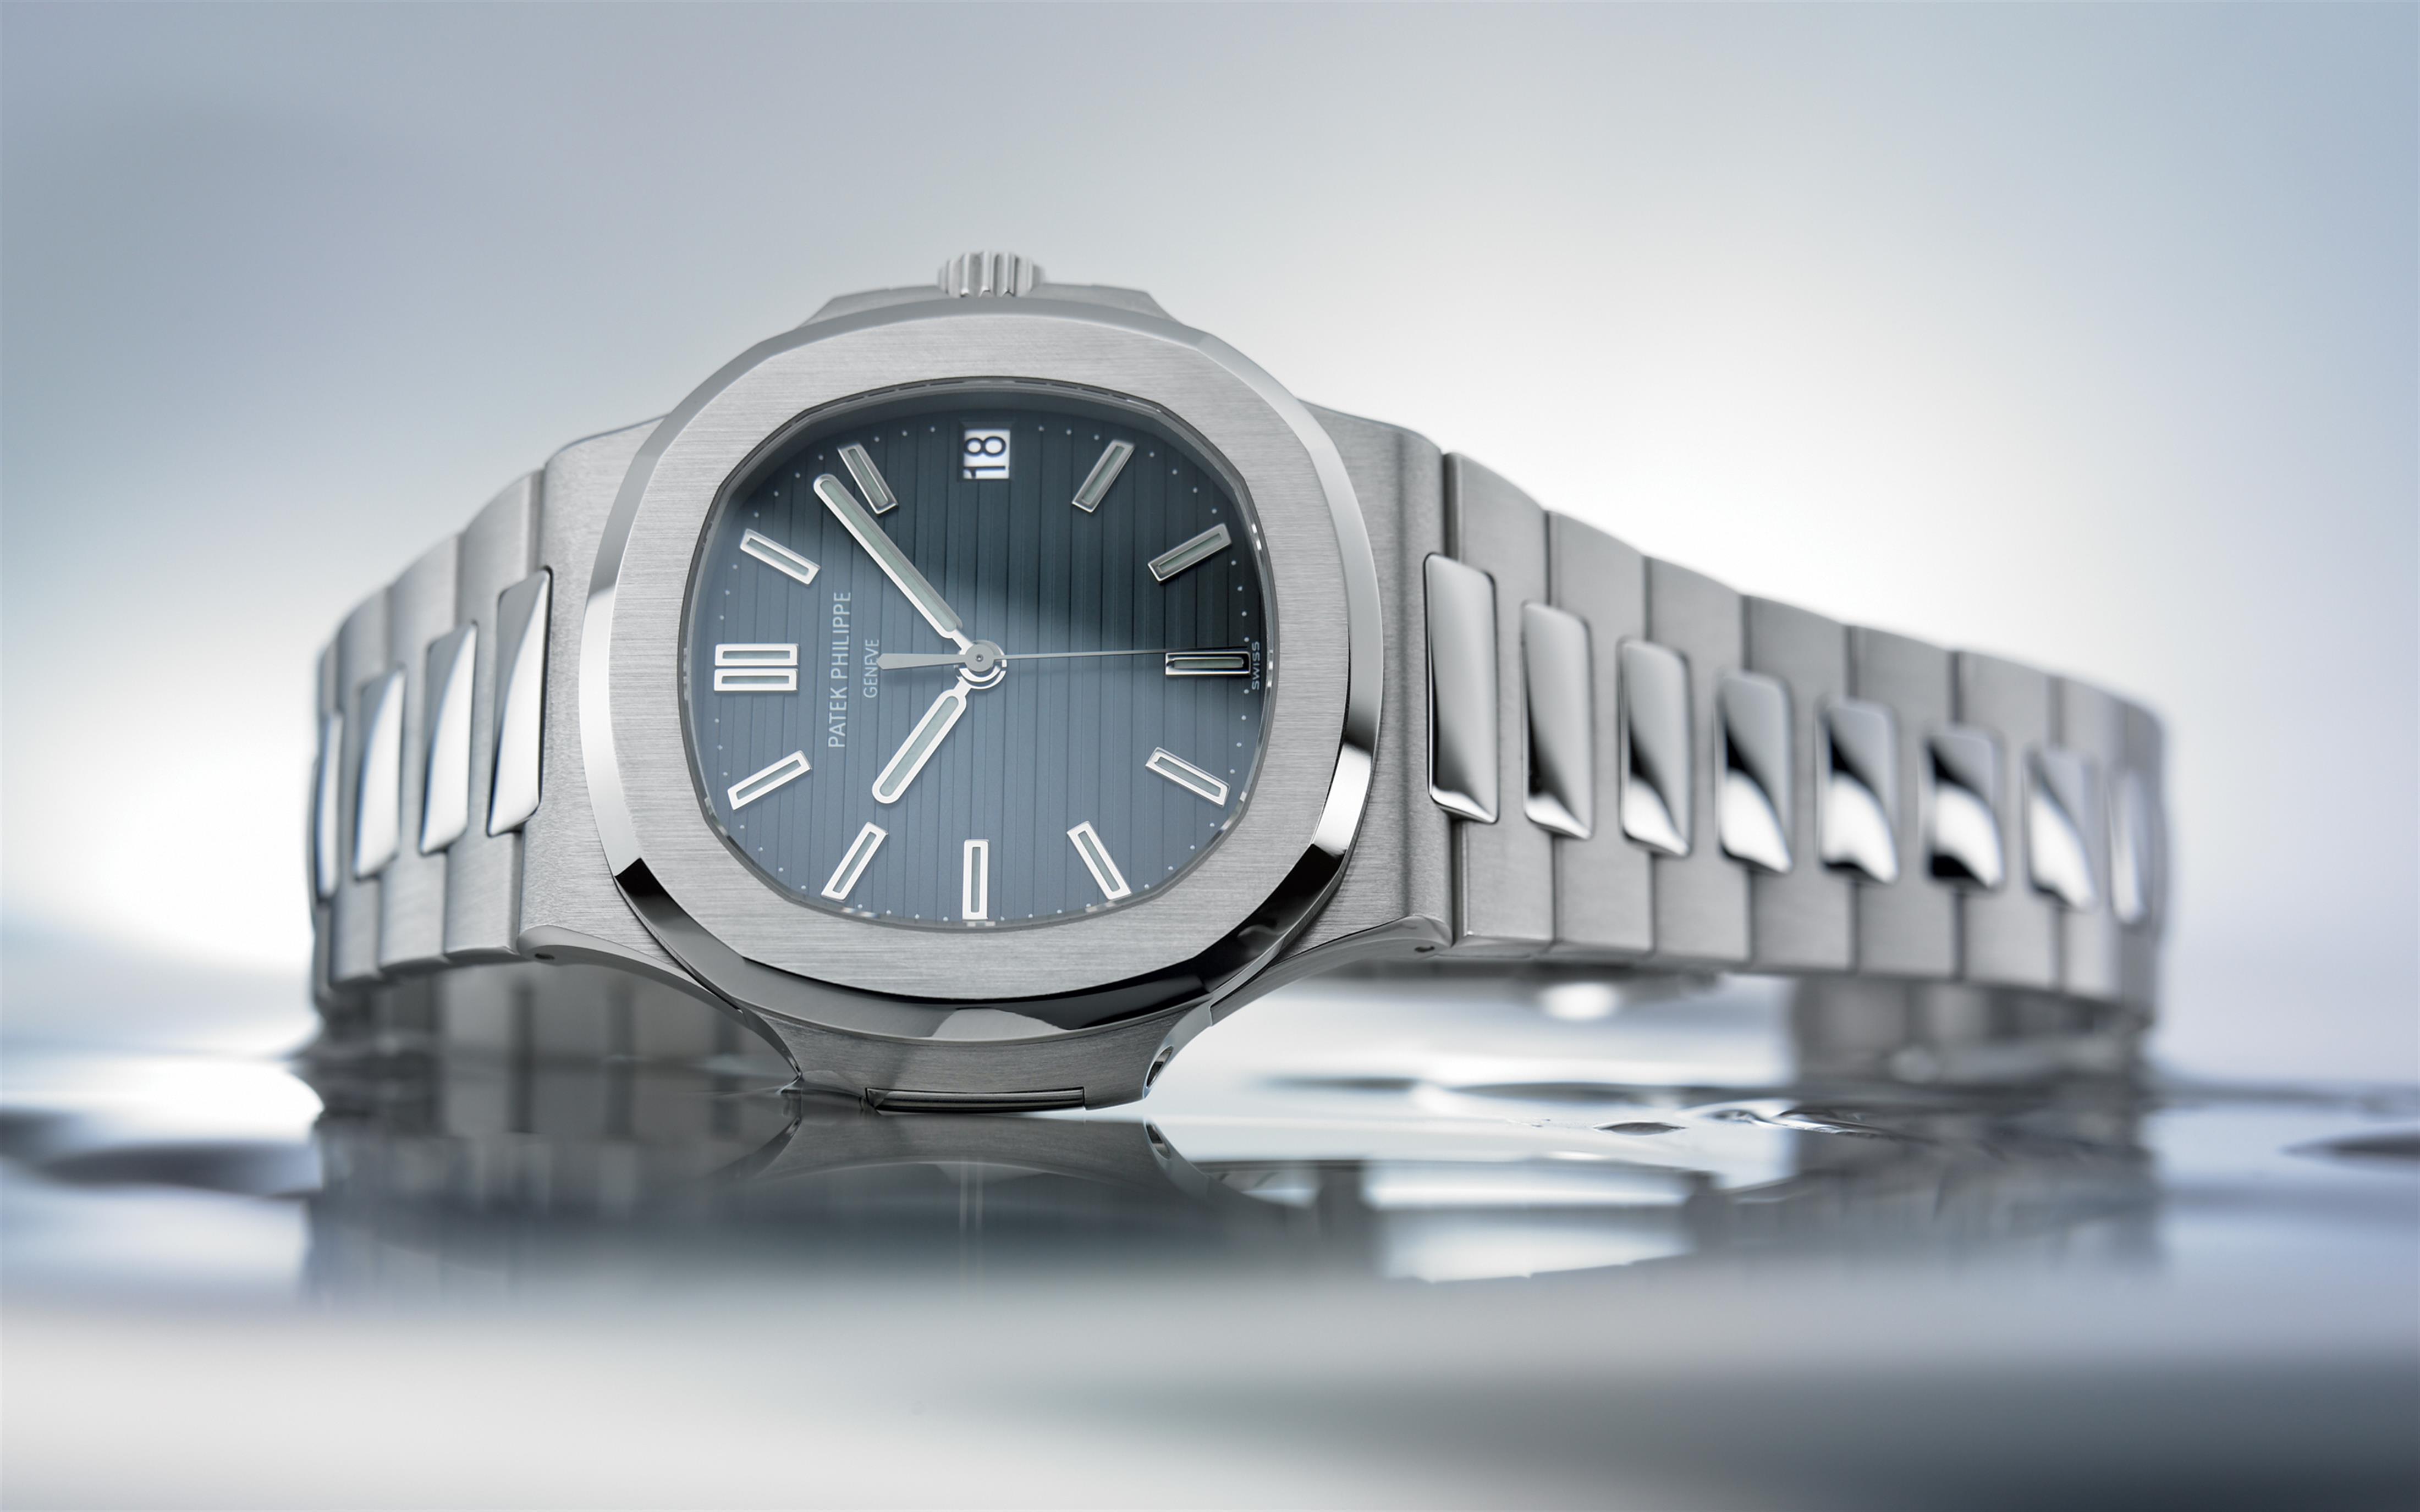 Patek Philippe Nautilus Travel Time Stainless Steel 5990/1A-001 - Manufacturer Warranty - ATO-W000010